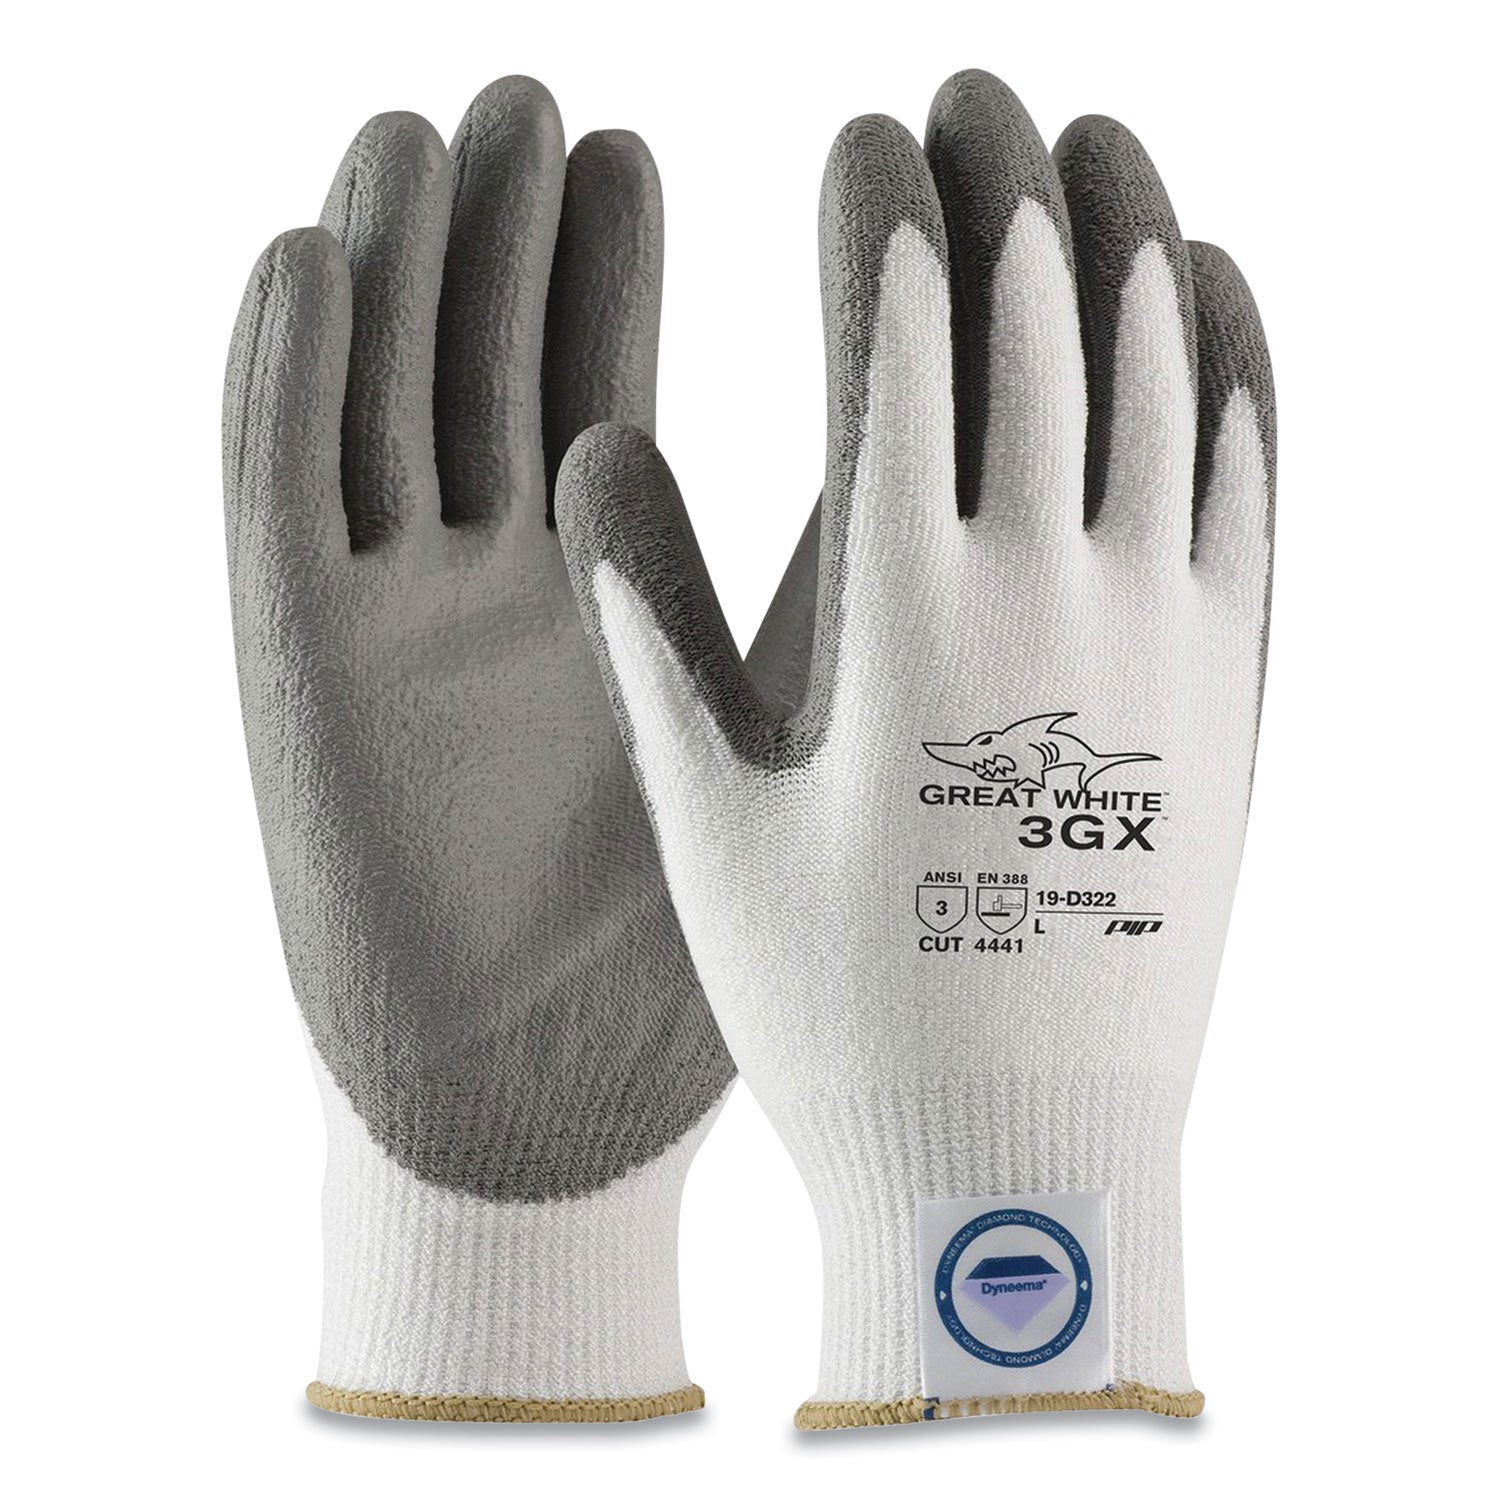 great-white-3gx-seamless-knit-dyneema-diamond-blended-gloves-x-large-white-gray_pid19d322xl - 1